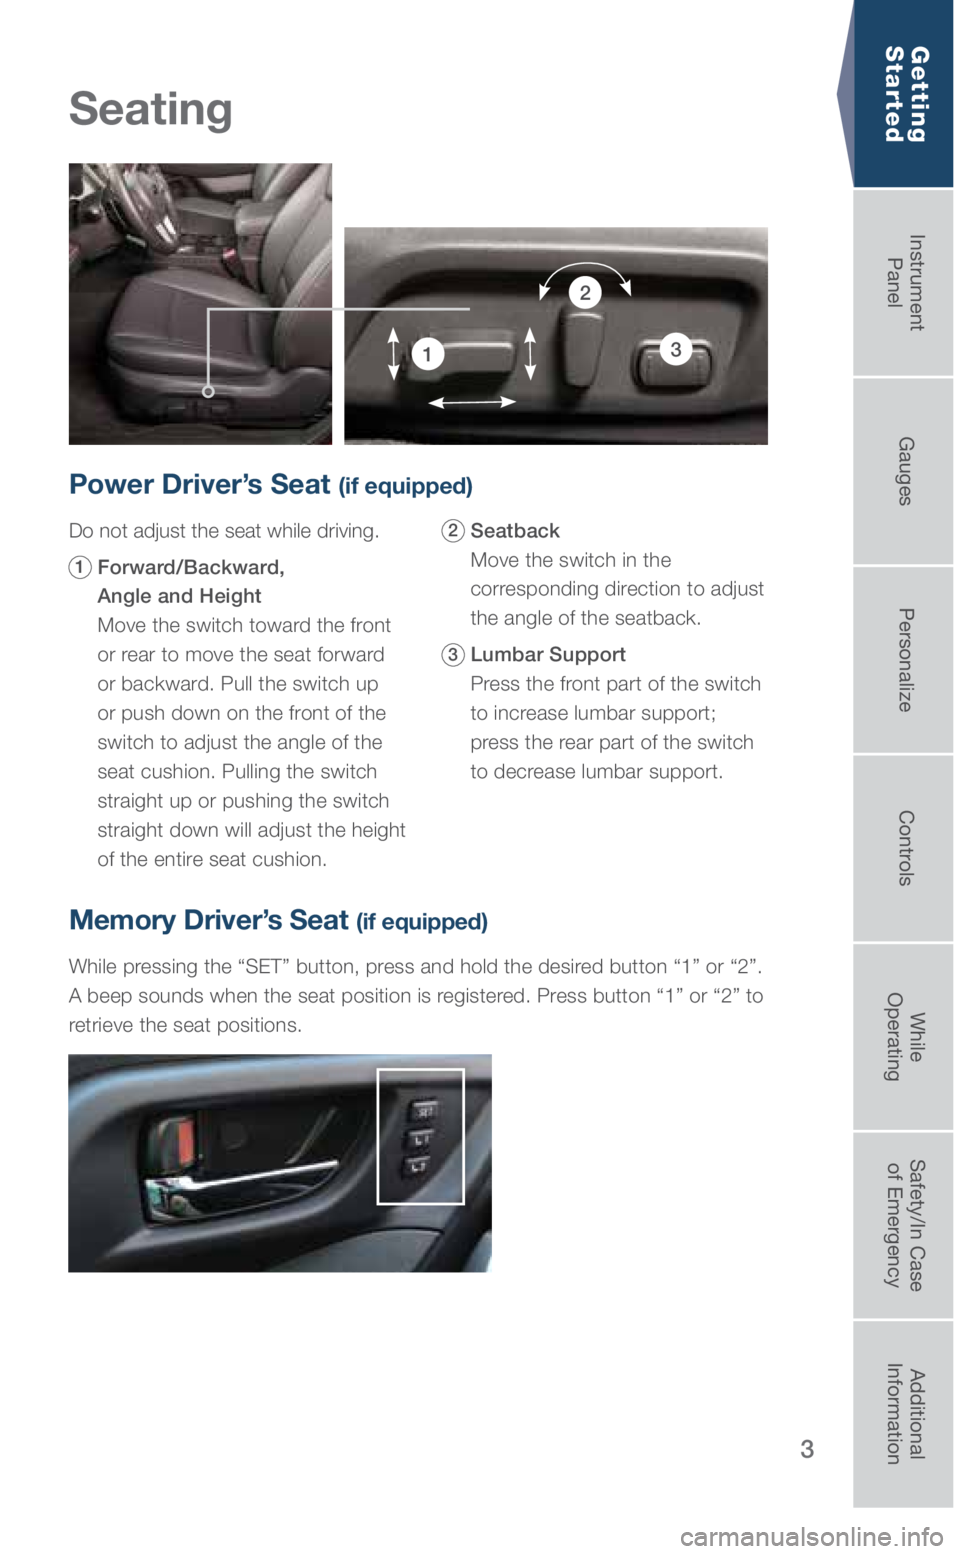 SUBARU OUTBACK 2019  Quick Guide 3
Seating
Getting  
Started
Power Driver’s Seat (if equipped)
Do not adjust the seat while driving.
1   Forward/Backward,   
Angle and Height  
 
Move the switch toward the front 
or rear to move th